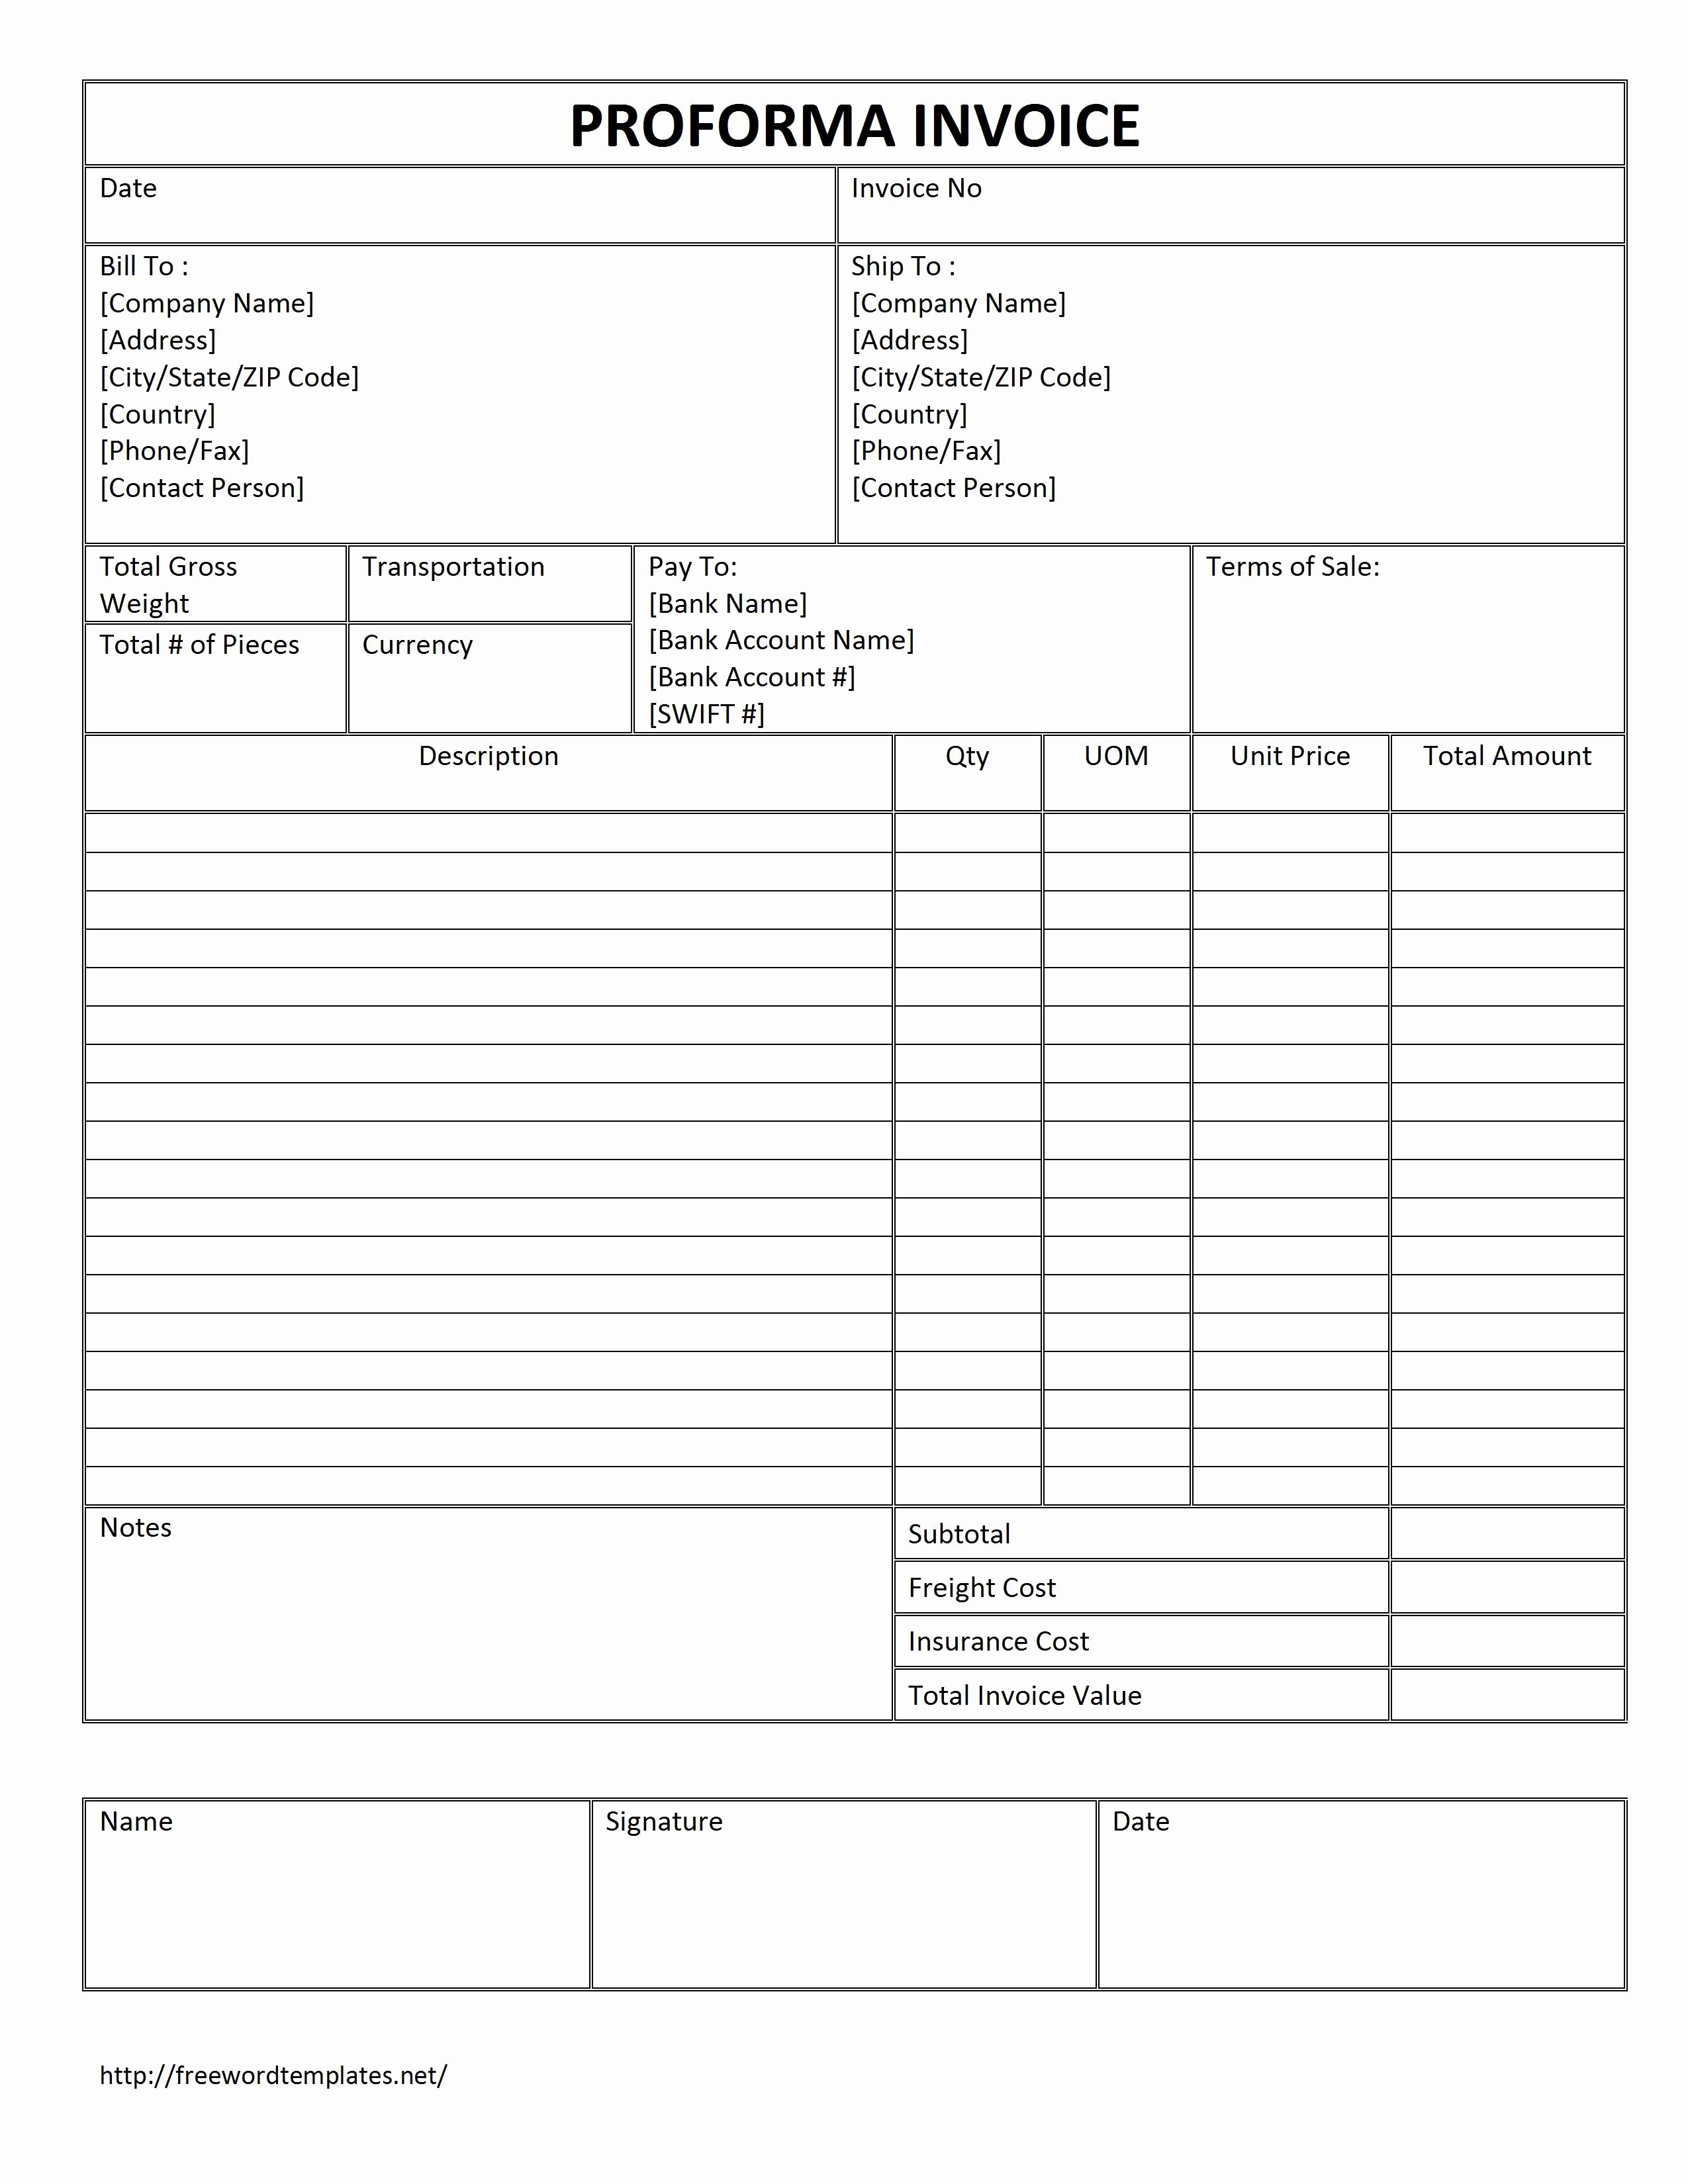 Examples Of Invoices In Word Awesome Proforma Invoice Template Word